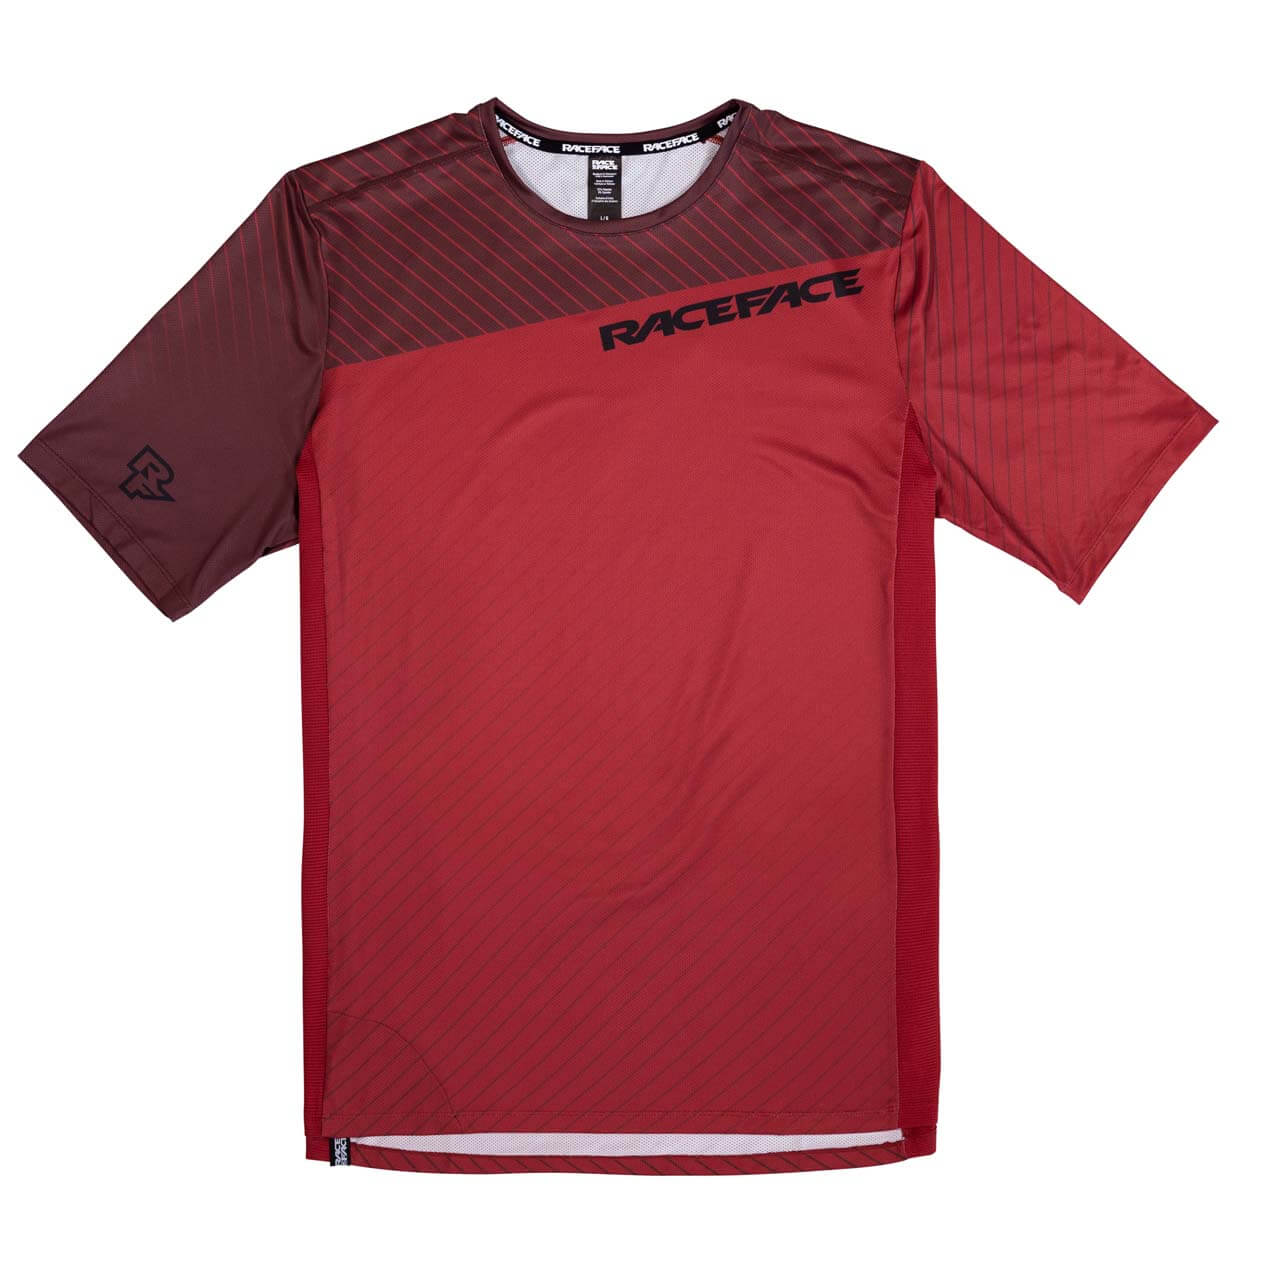 Race Face Bike-Jersey Indy - Red, XL von RaceFace